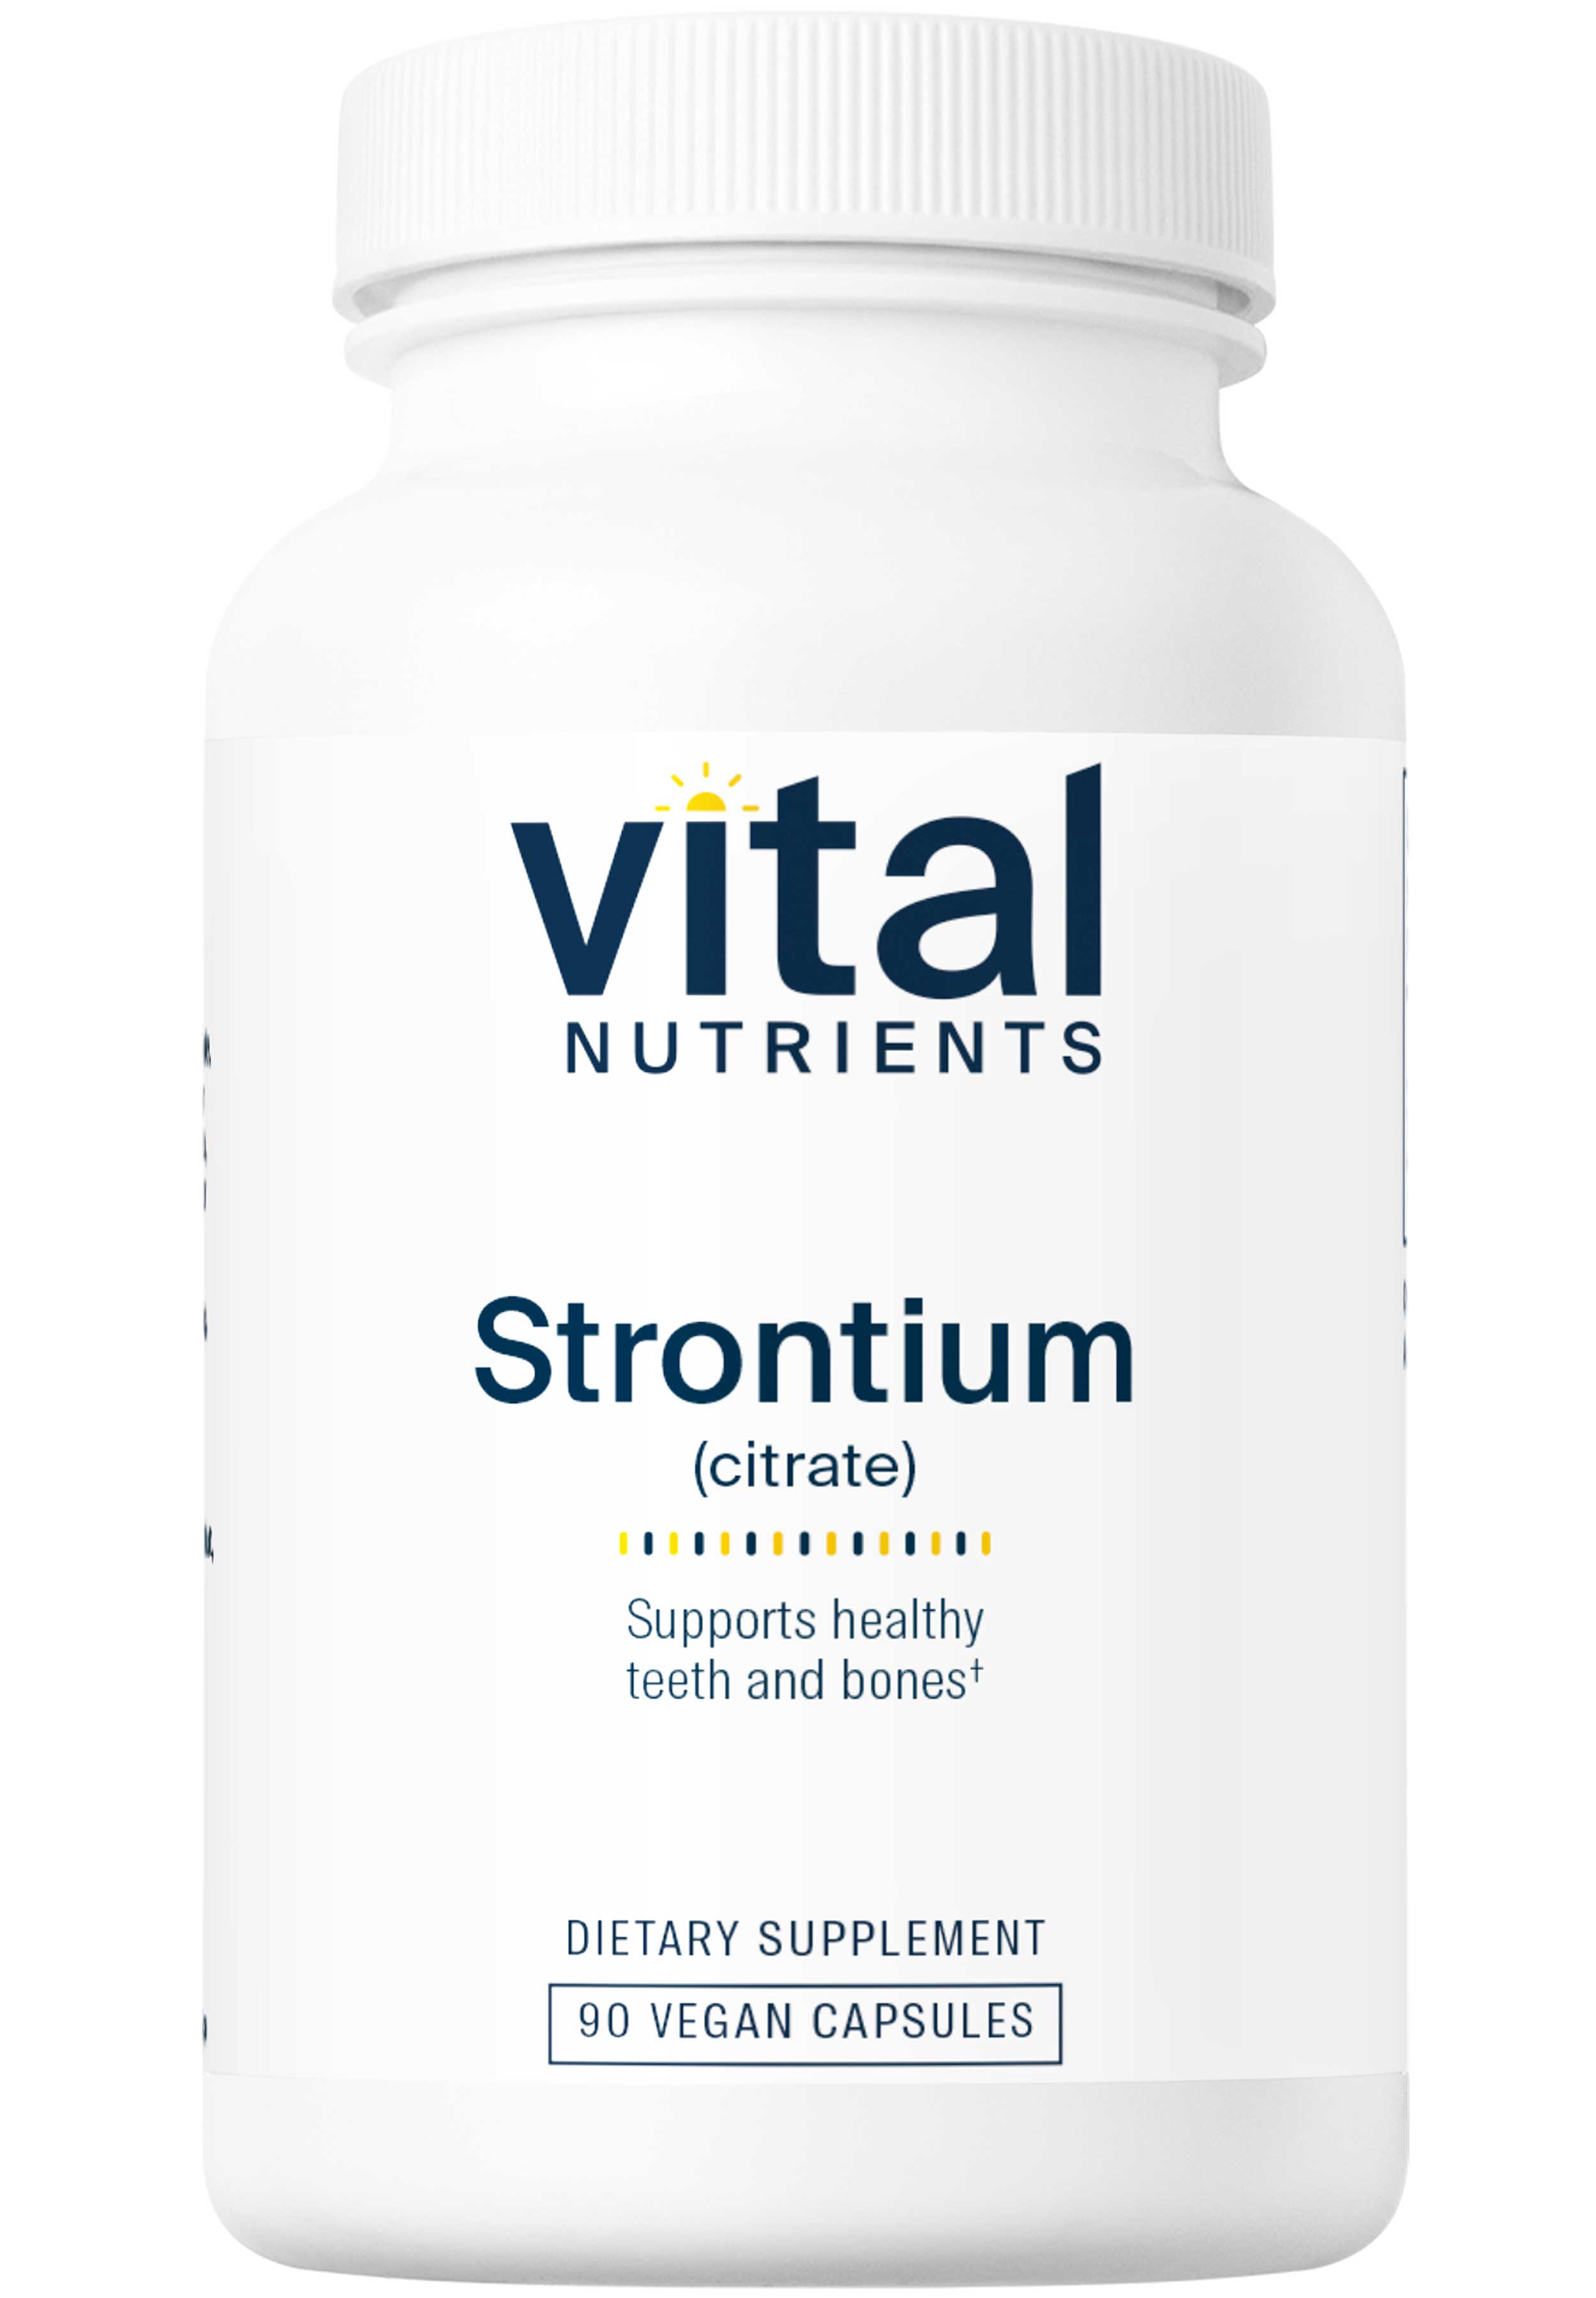 Vital Nutrients Strontium (citrate) 227mg